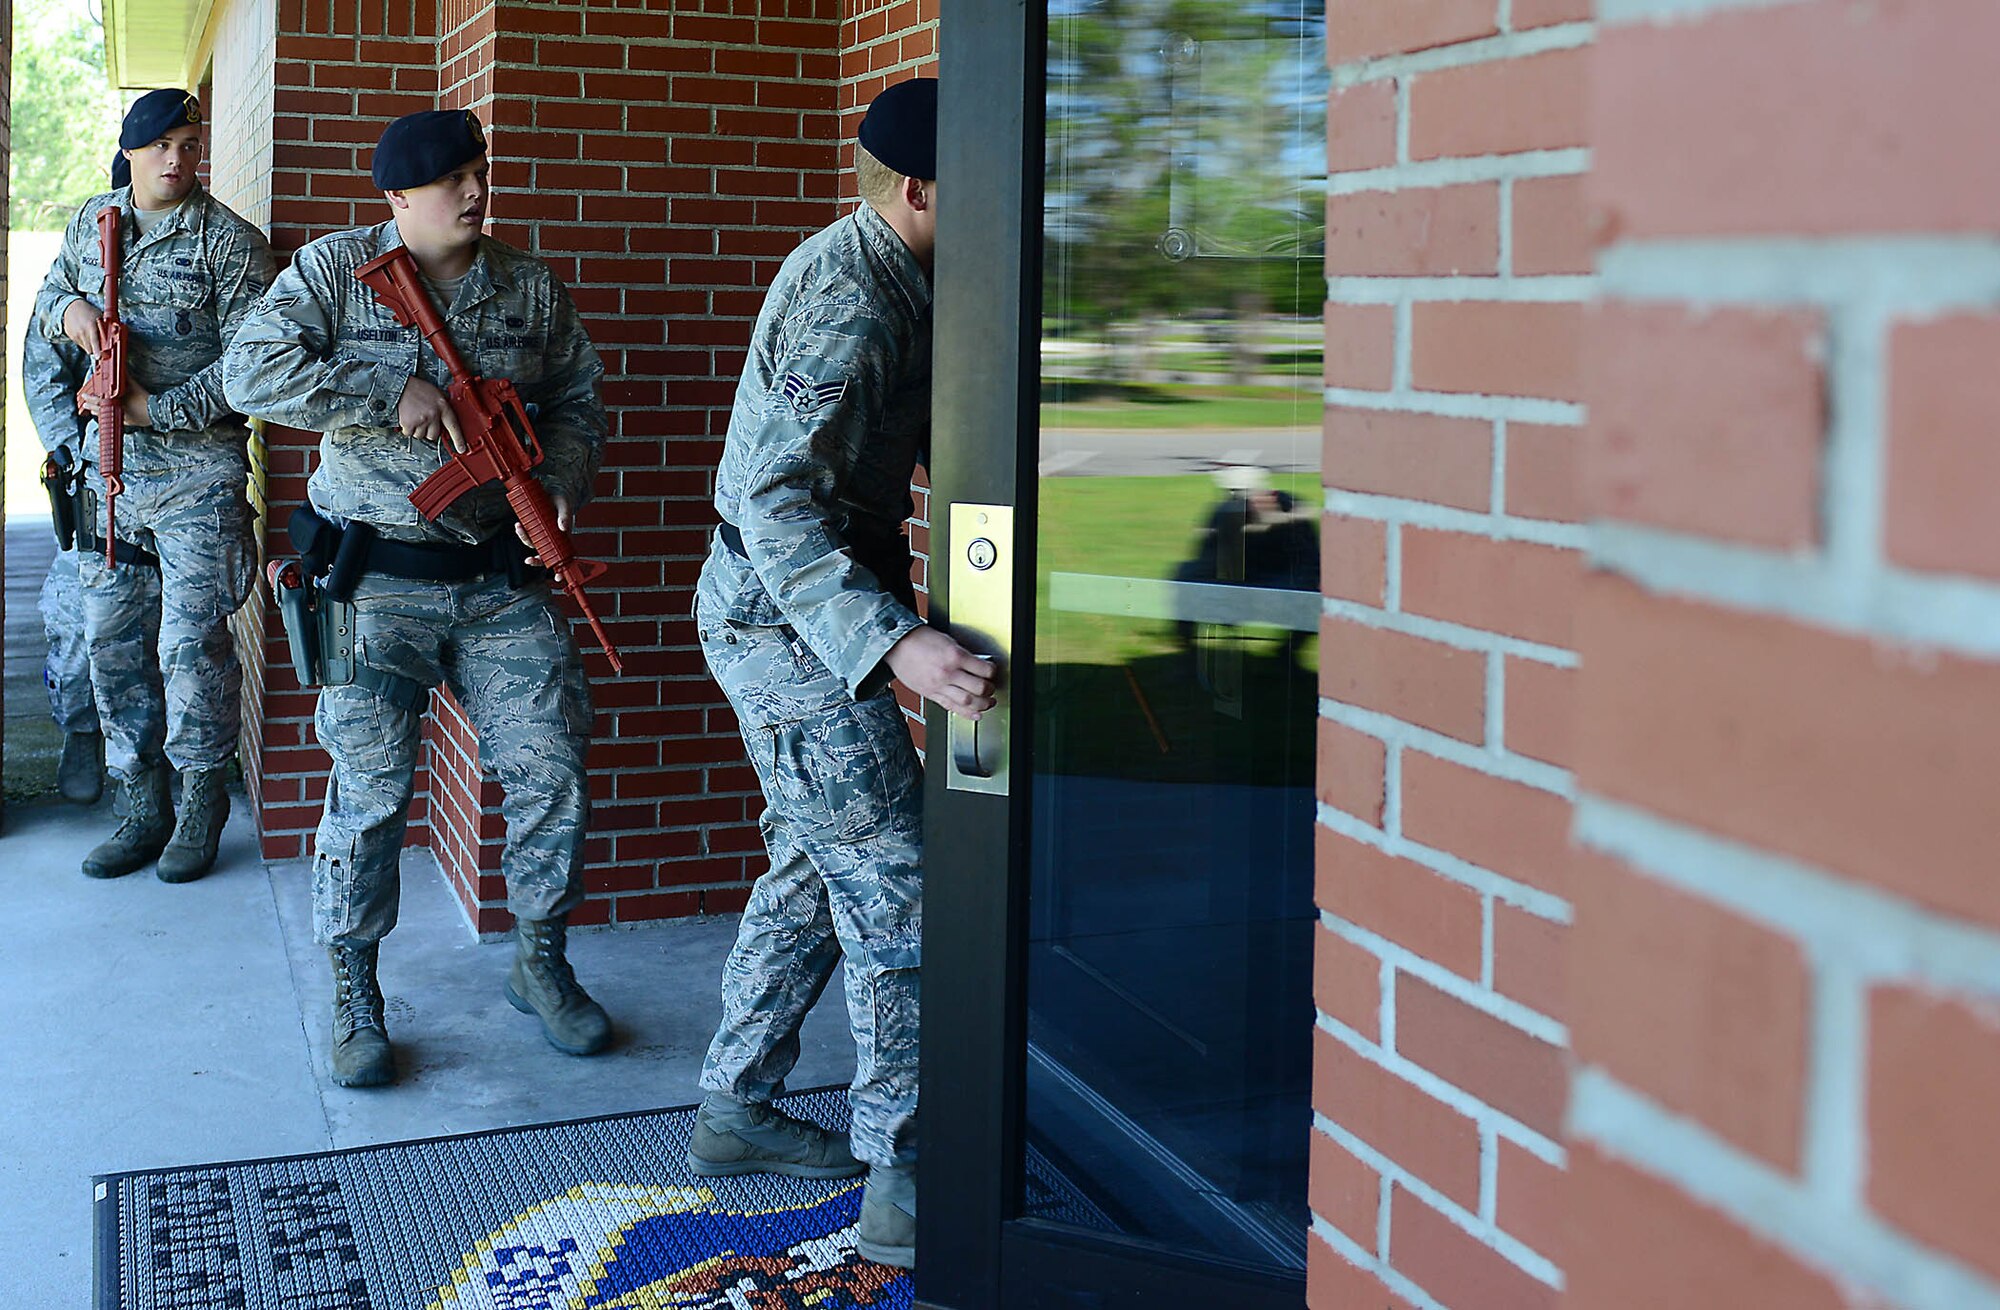 MOODY AIR FORCE BASE, Ga. – Airmen from the 23d Security Forces Squadron enter the base education office in response to an active shooter exercise at Moody Air Force Base, Ga., May 16, 2014. The exercise was implemented to primarily test the reactions and responses of security forces members, medical personnel and firefighters. (U.S. Air Force photo by Senior Airman Tiffany M. Grigg/Released)